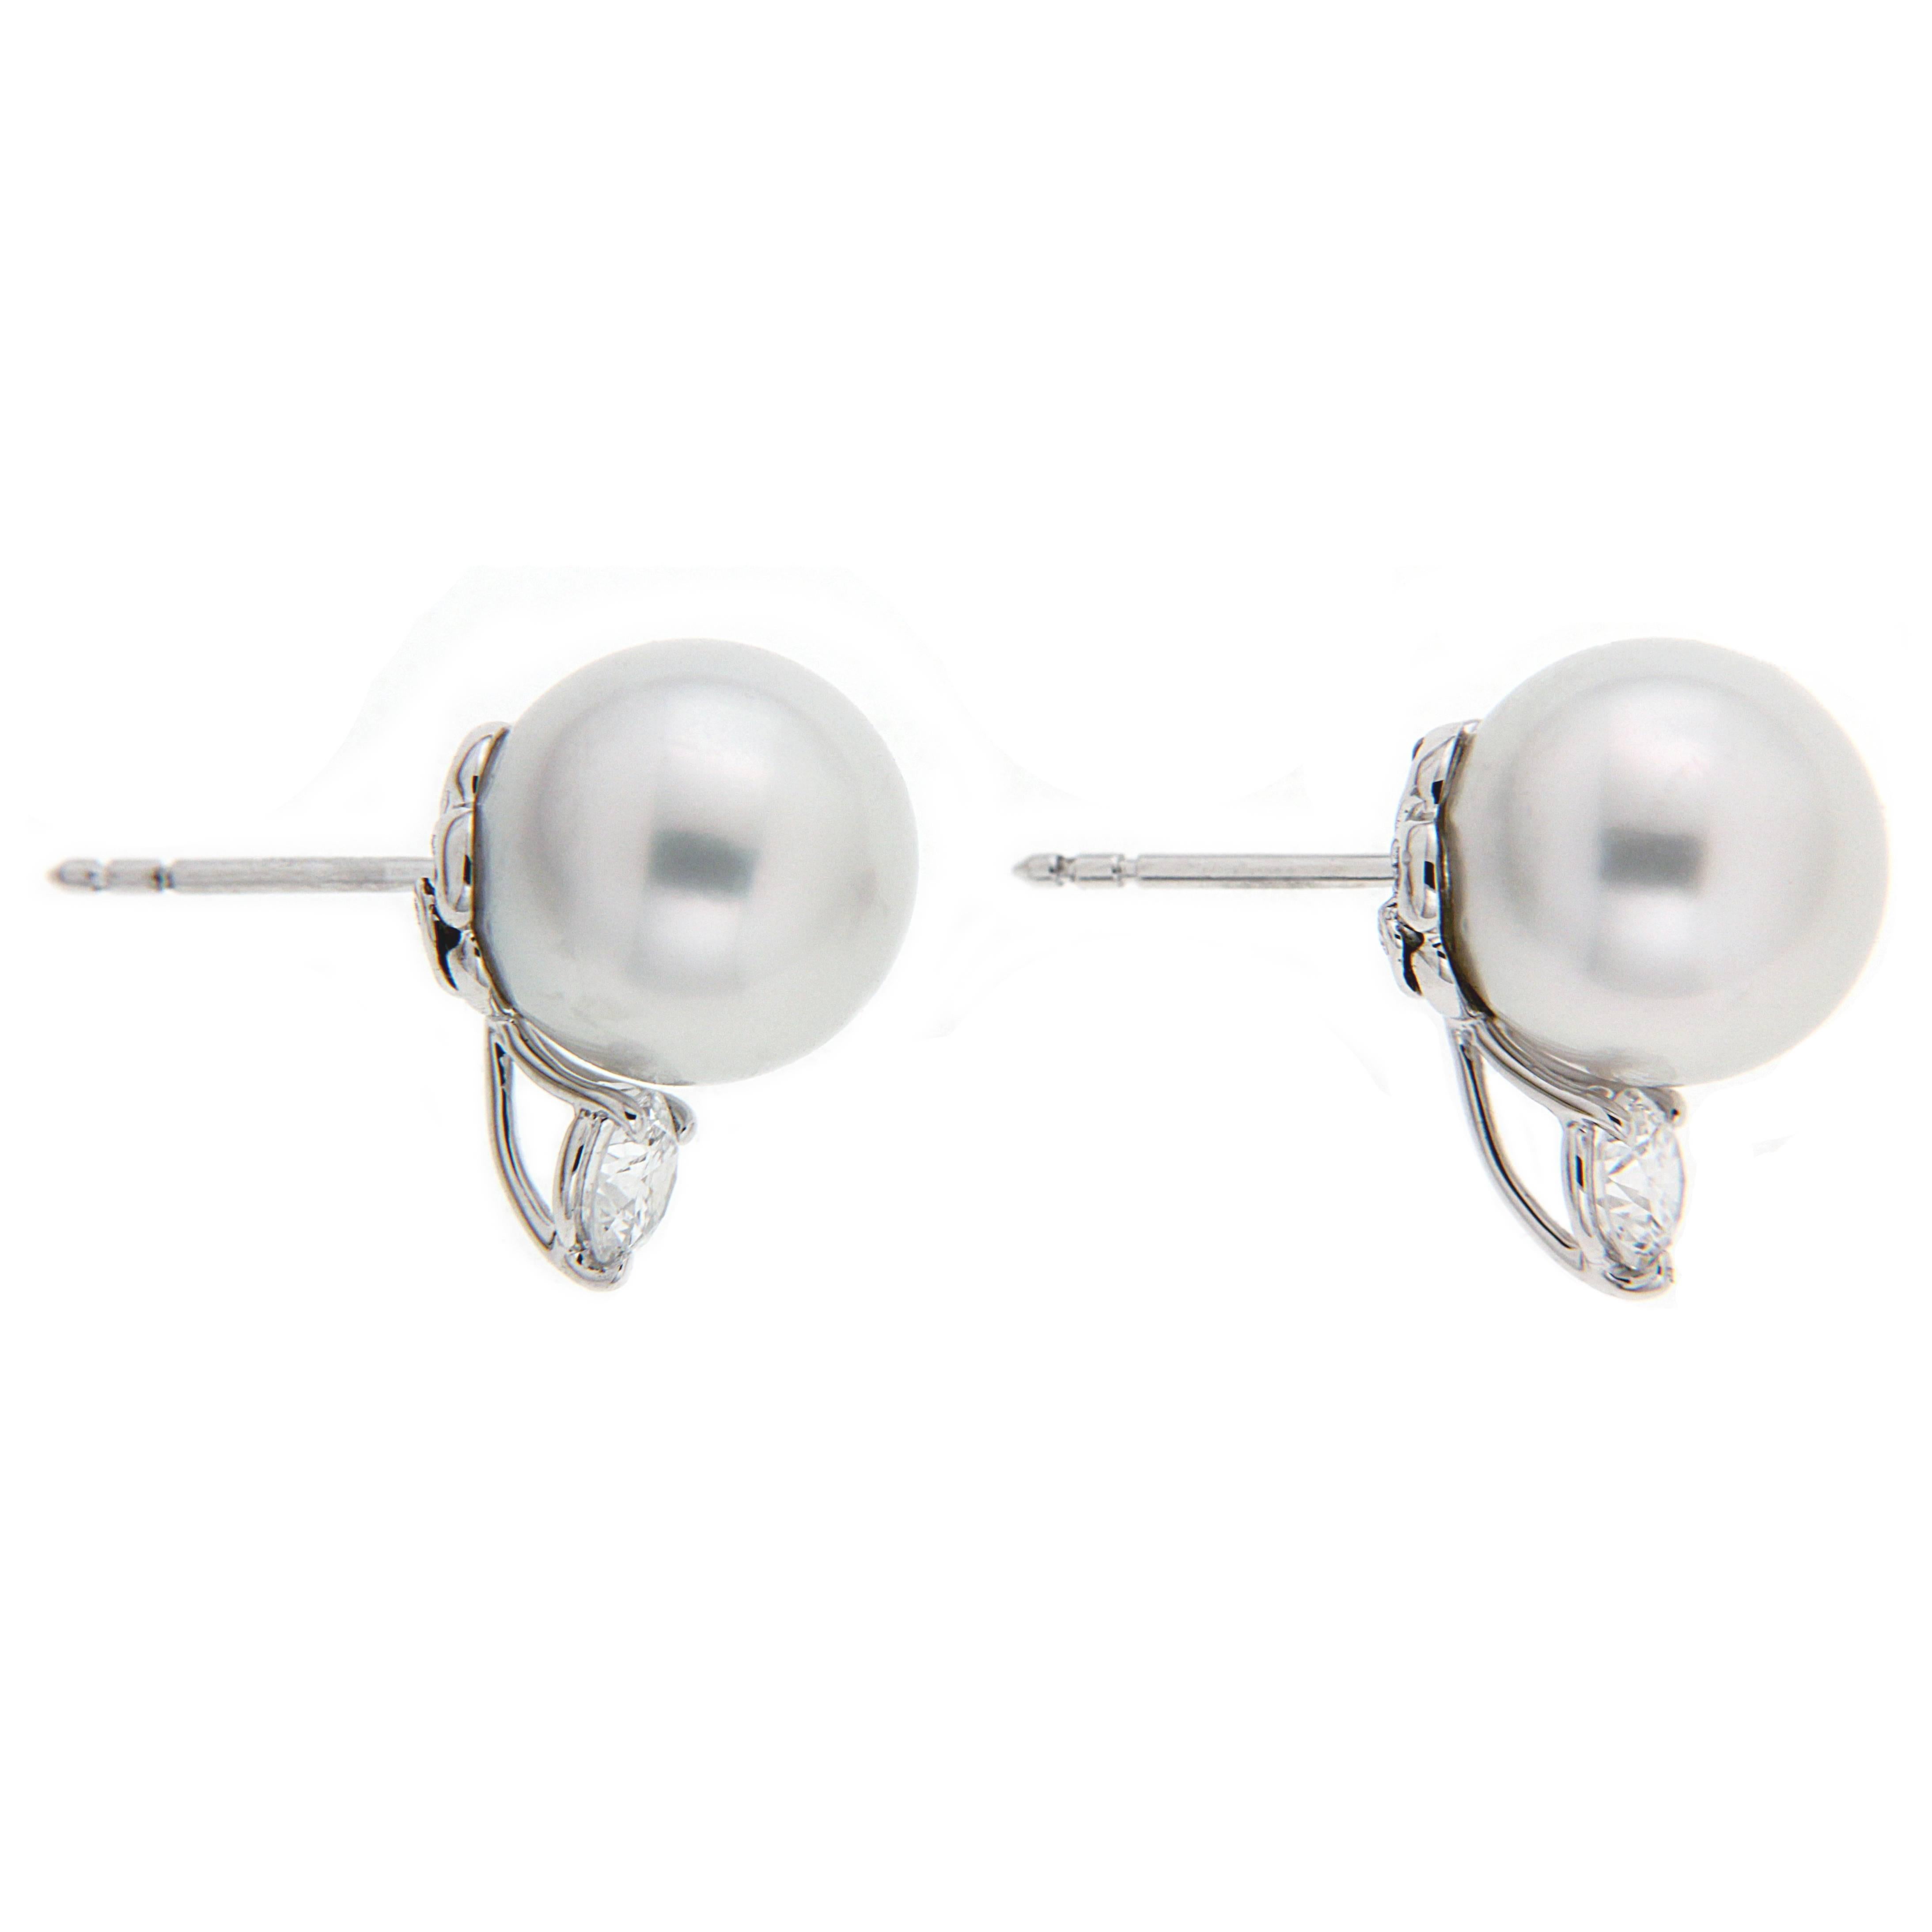 10.6mm South Sea Pearls with 2 Round Diamonds at the bottom Stud earrings with Posts in 18kt White Gold.  Diamond total weight 0.56ctw (DEF VVS quality)